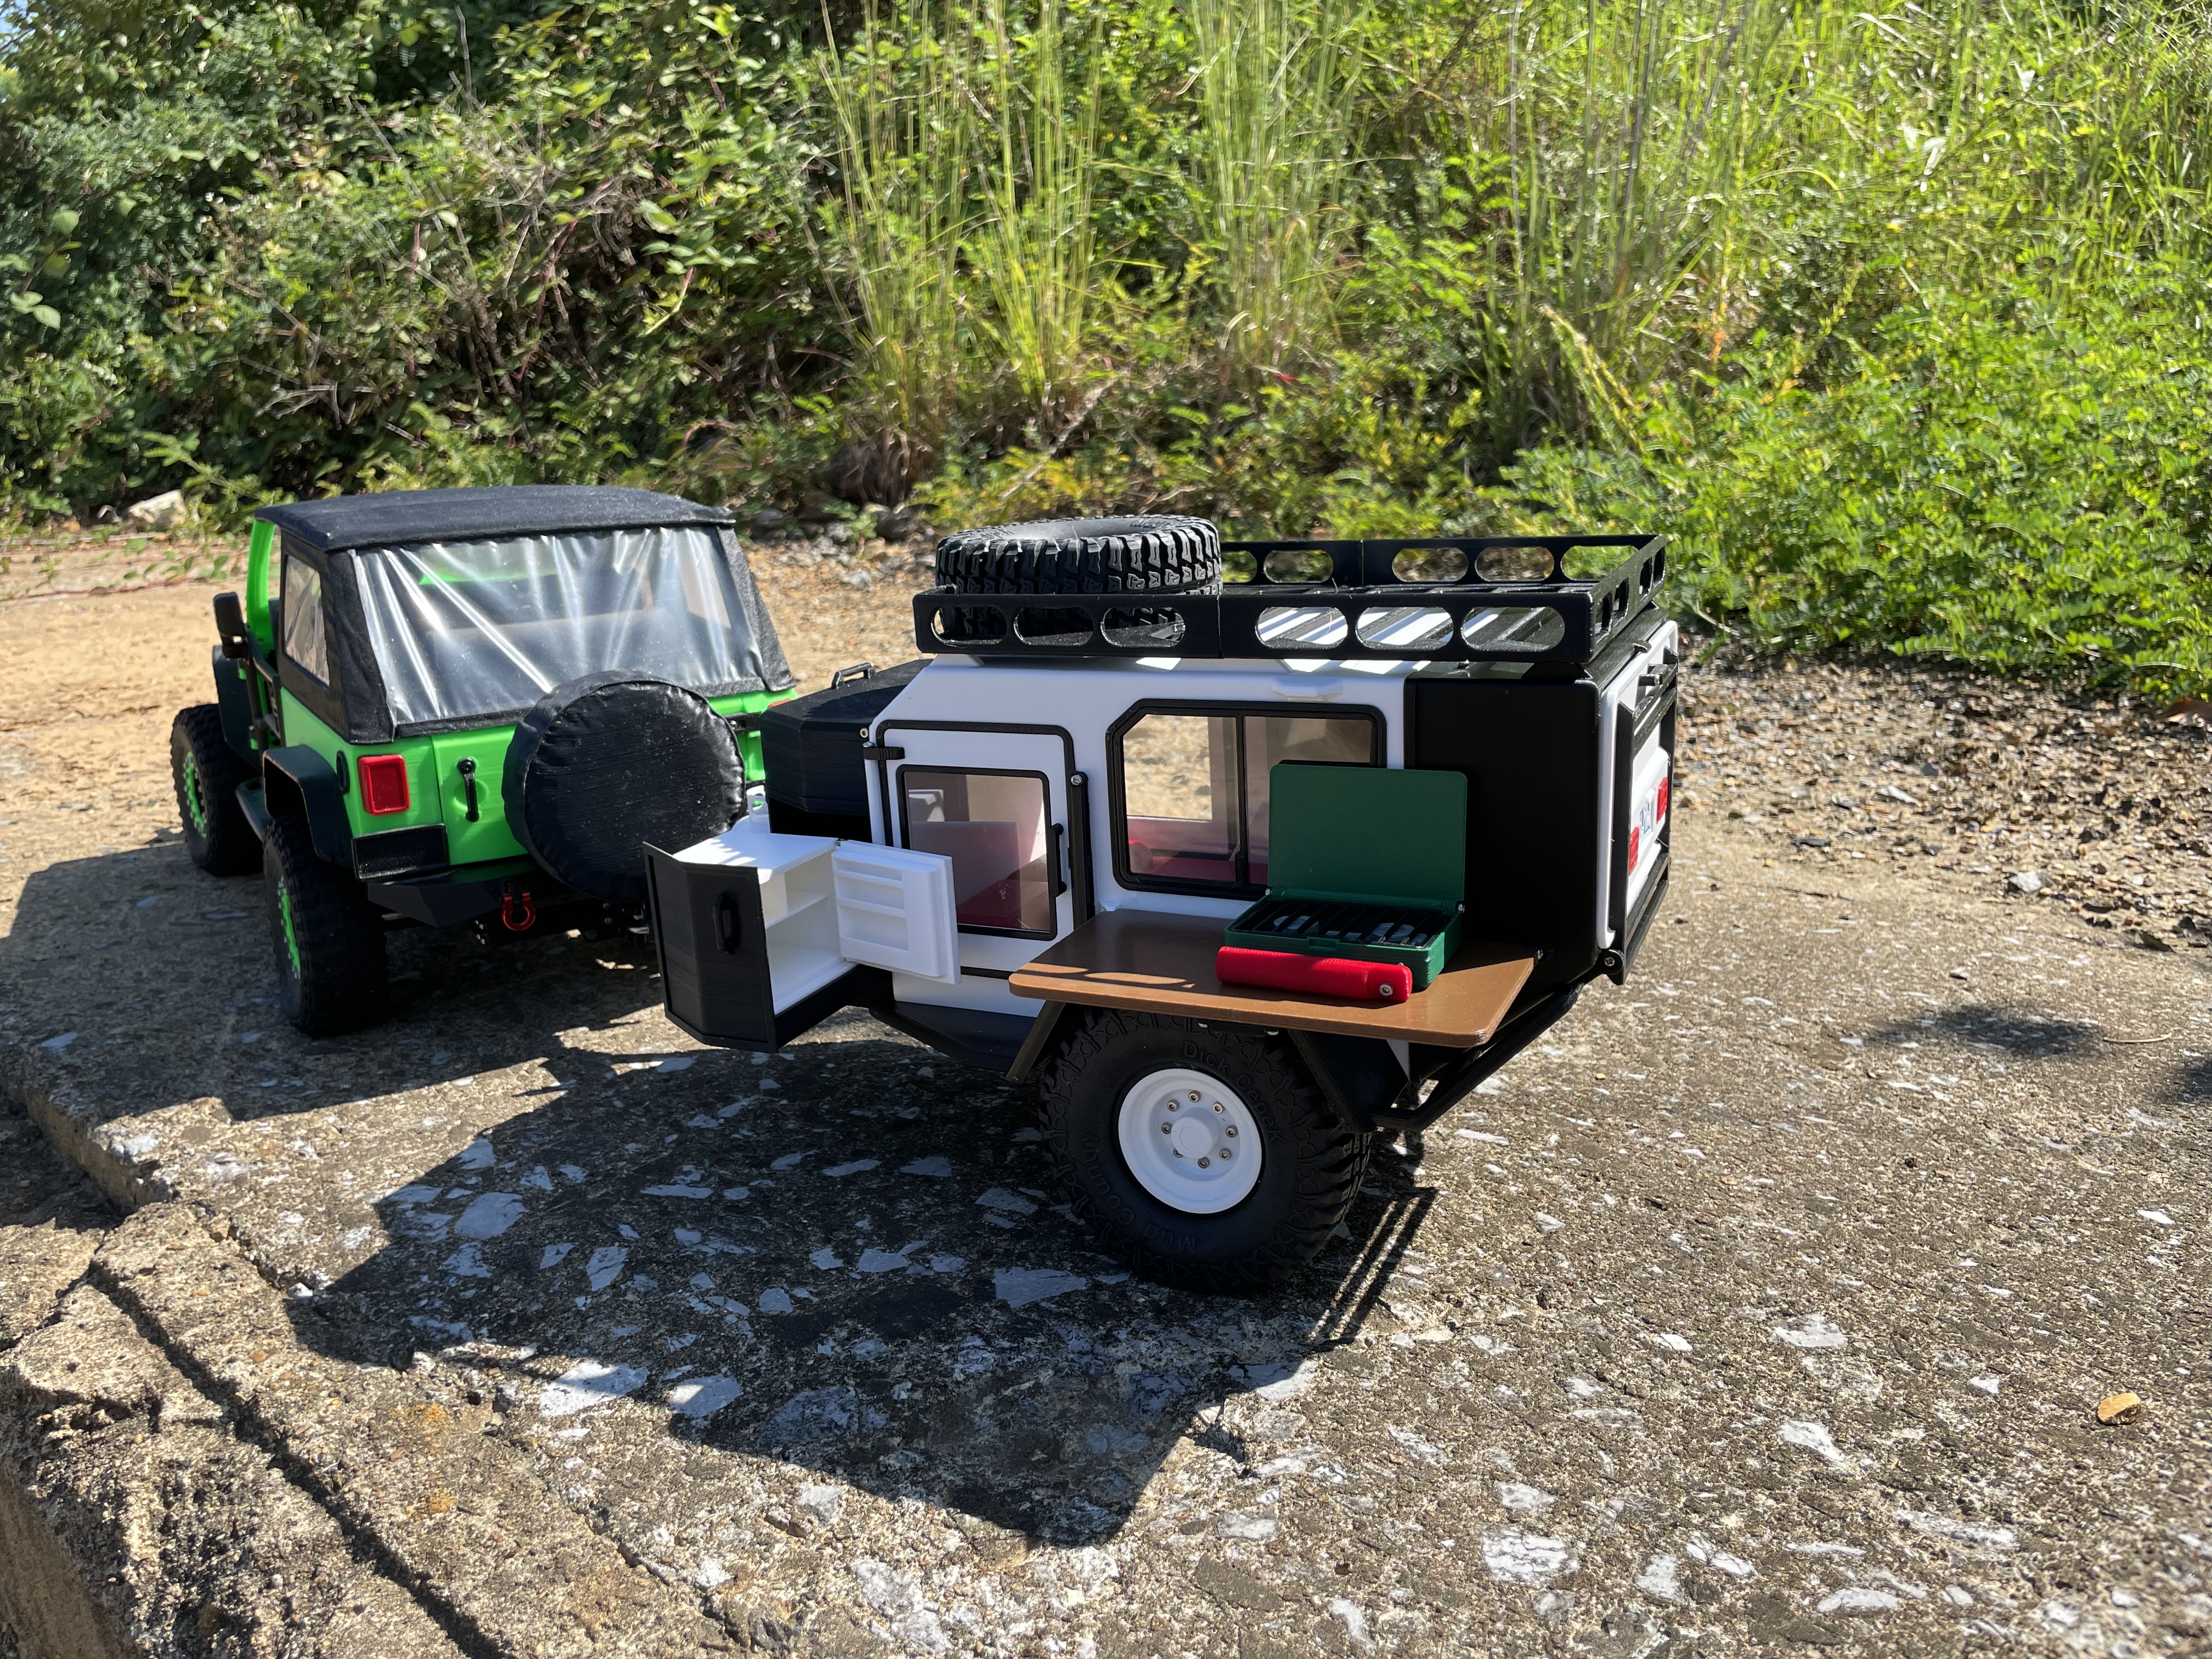 "Rock Hopper" off road Camper 1:8 scale RC model by BlackCrow